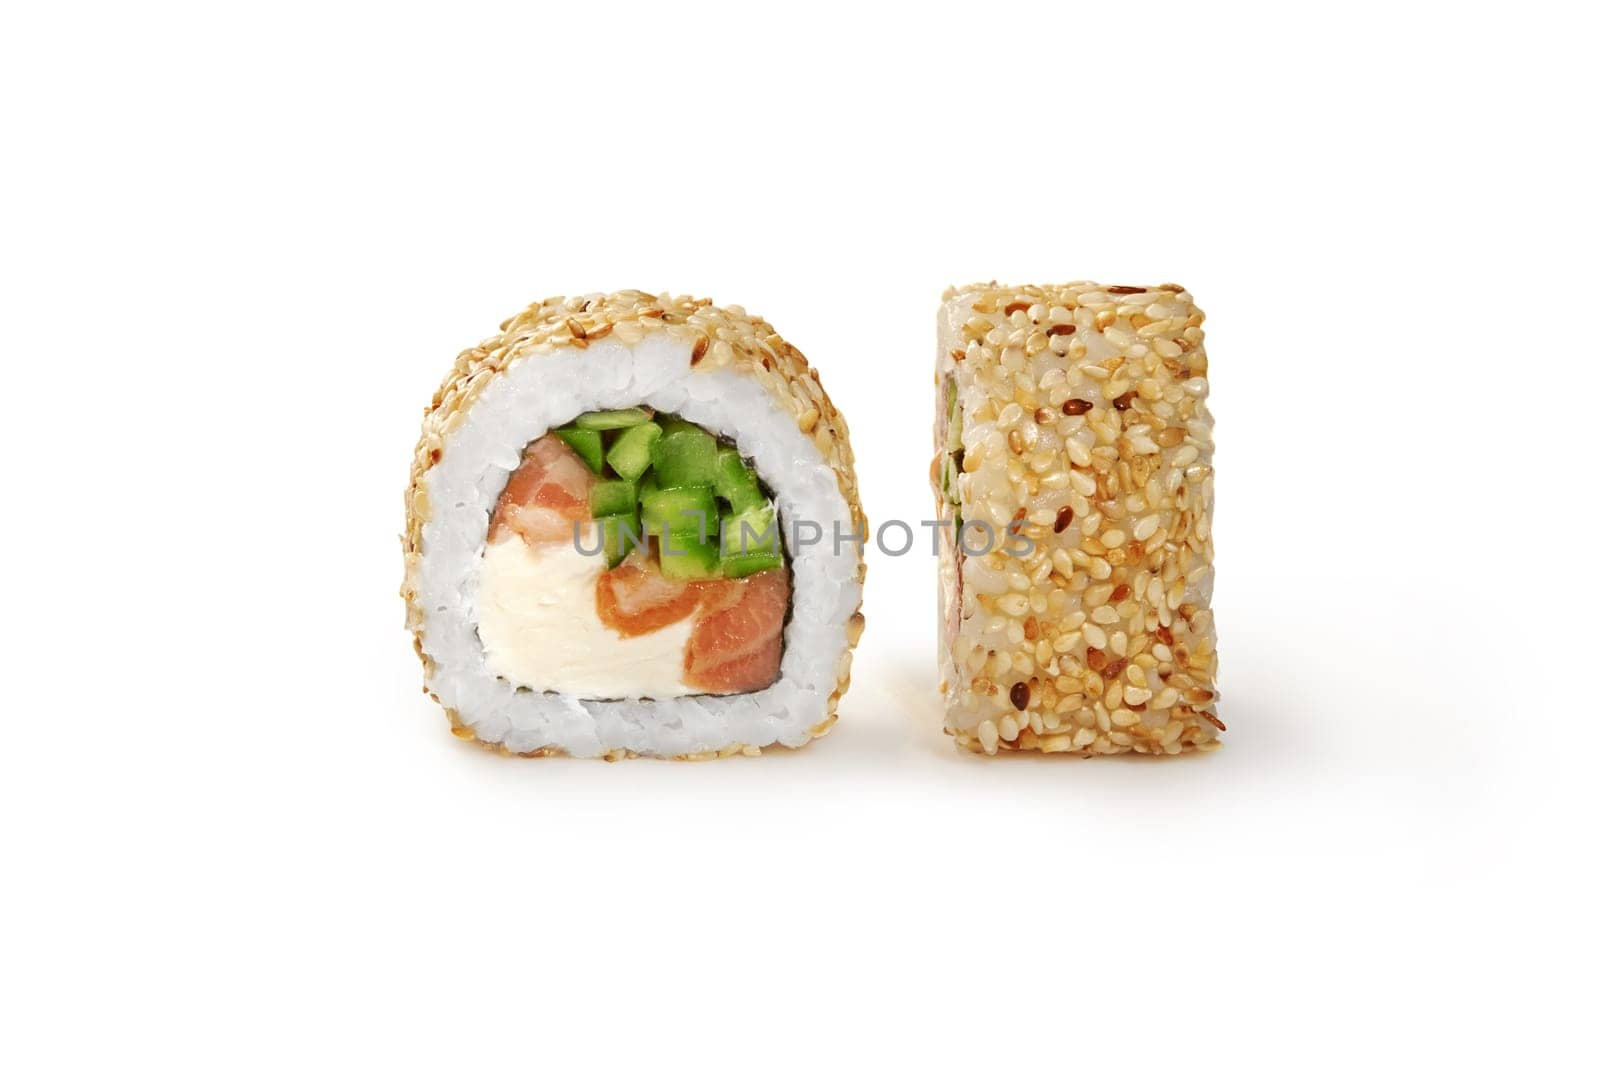 Closeup of appetizing California sushi roll with smoked salmon, cream cheese and cucumber coated with sesame seeds on white background. Japanese authentic cuisine